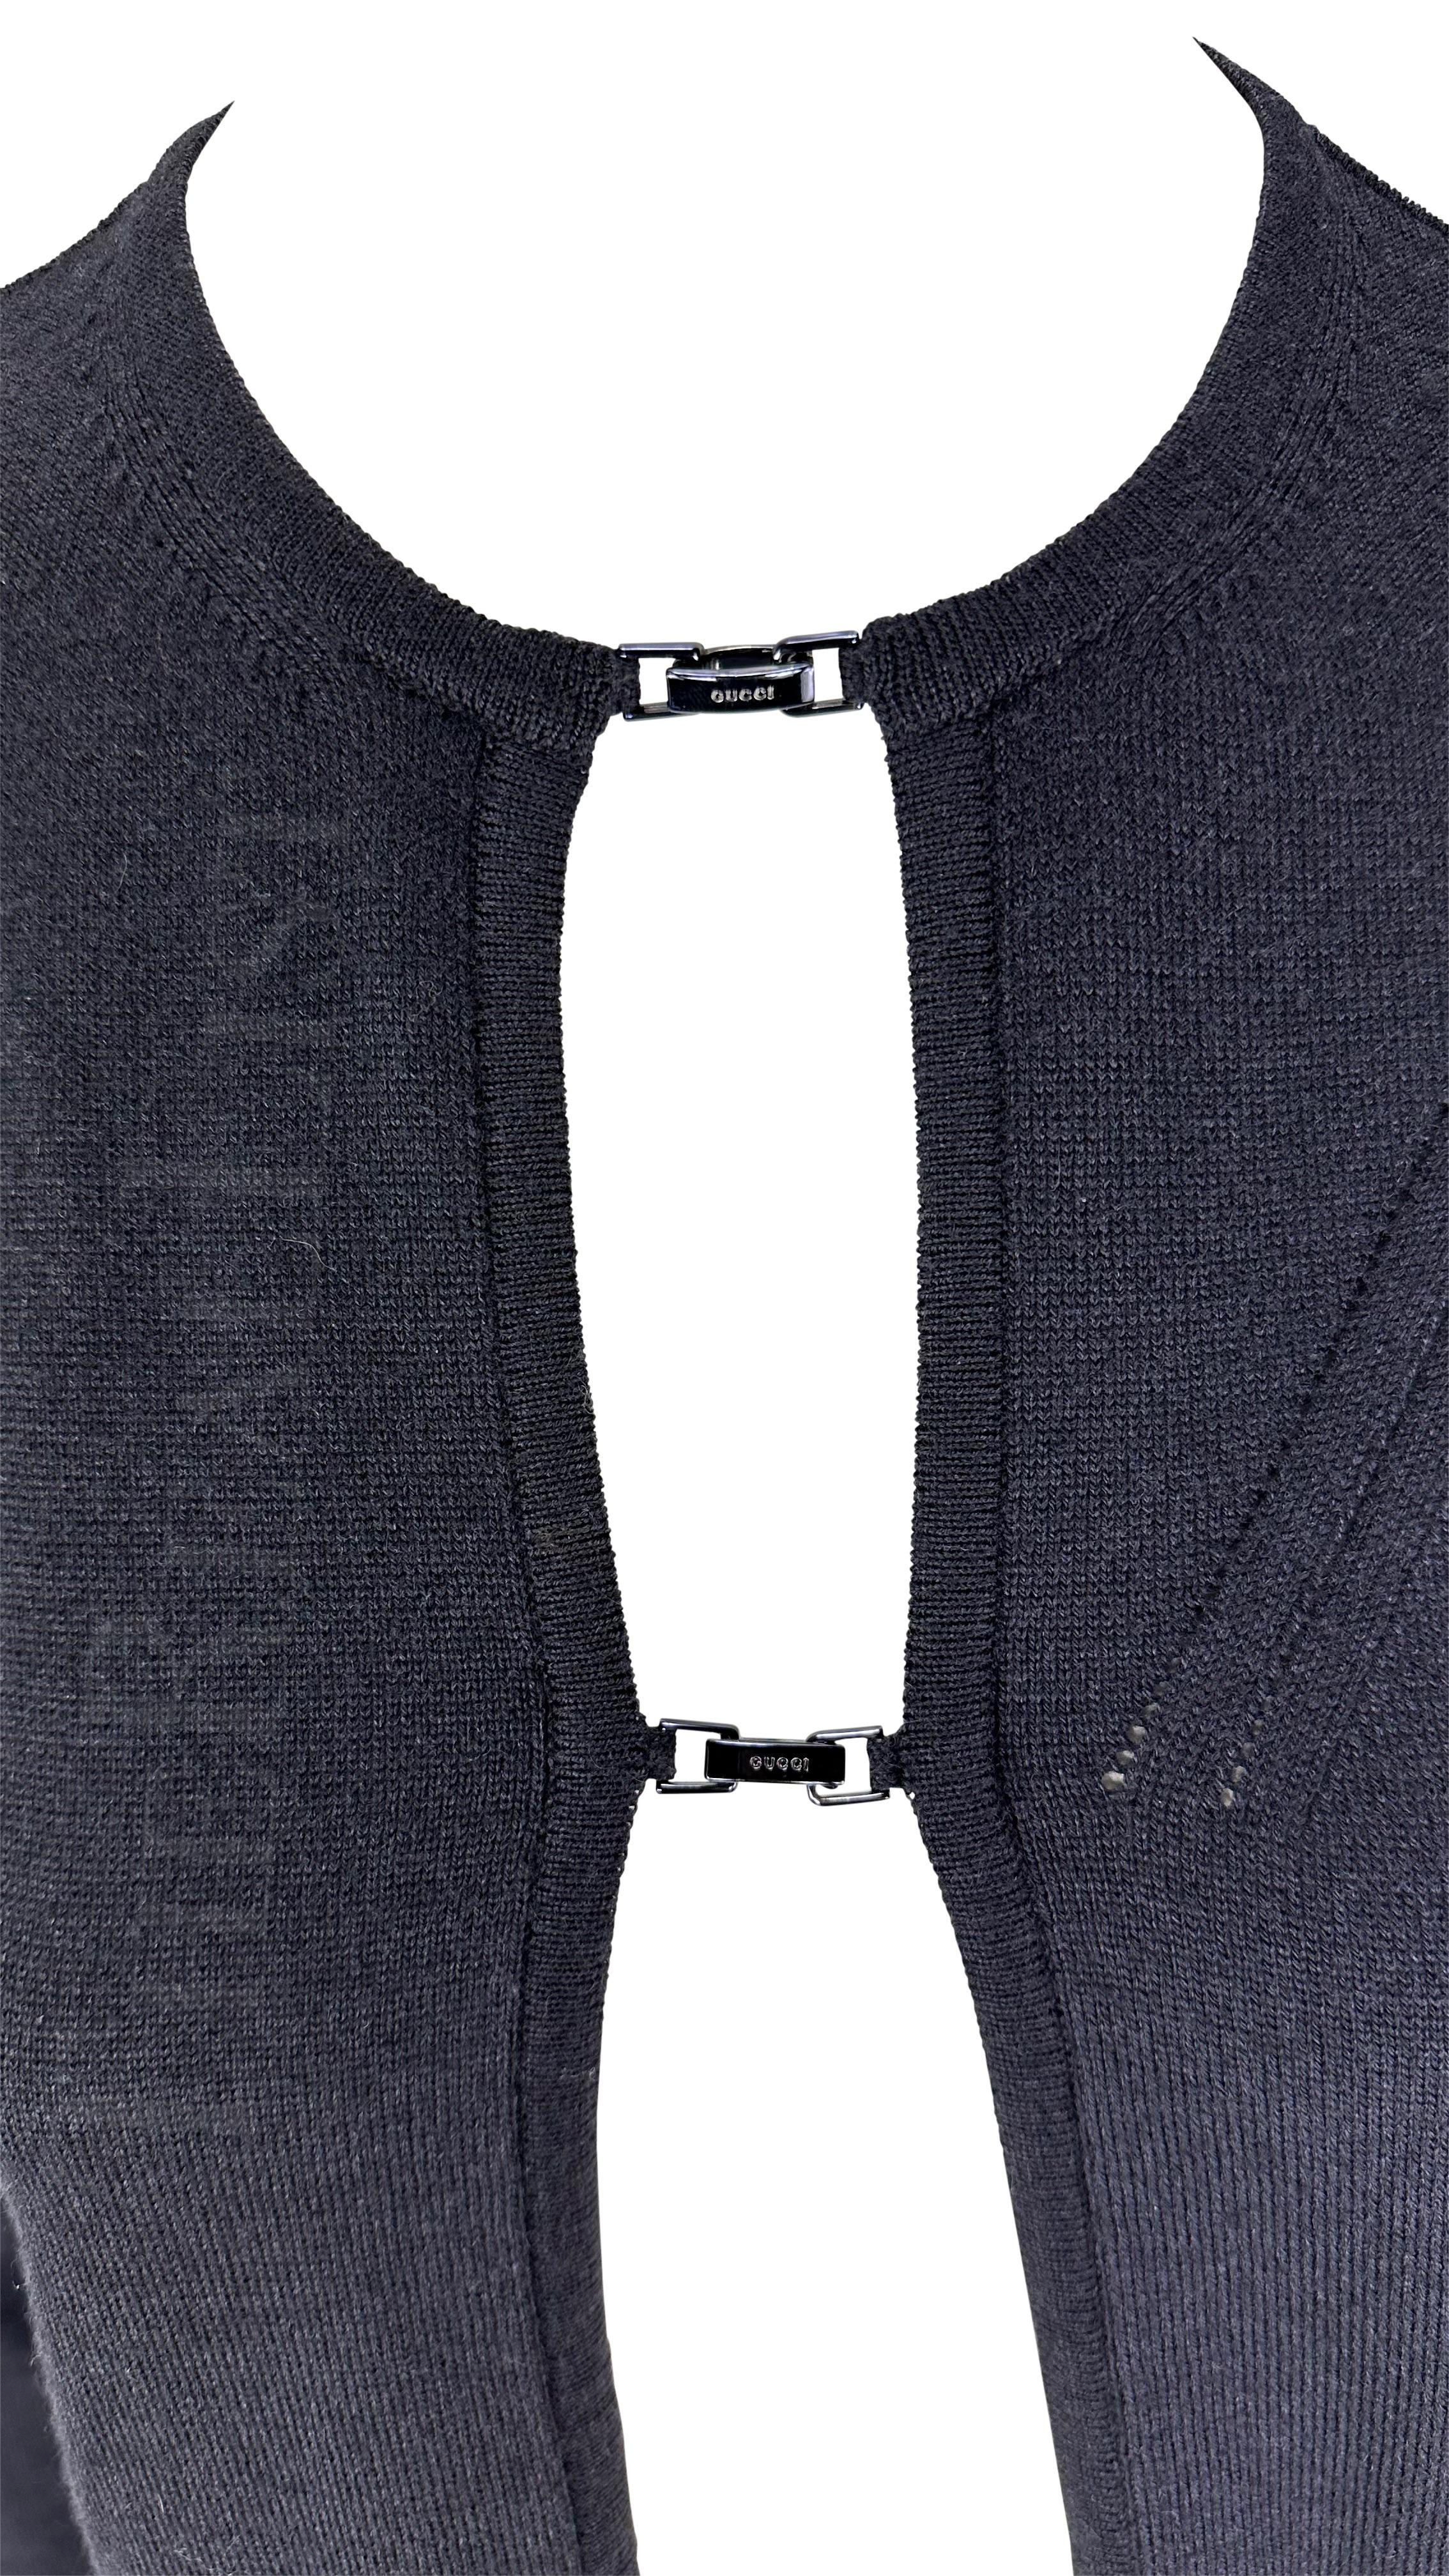 Presenting an open black knit Gucci cardigan, designed by Tom Ford. From the Fall/Winter 1998 collection, this incredible cardigan features two closures at the front, each marked 'Gucci', which tactfully leave the sweater slightly open. The sweater